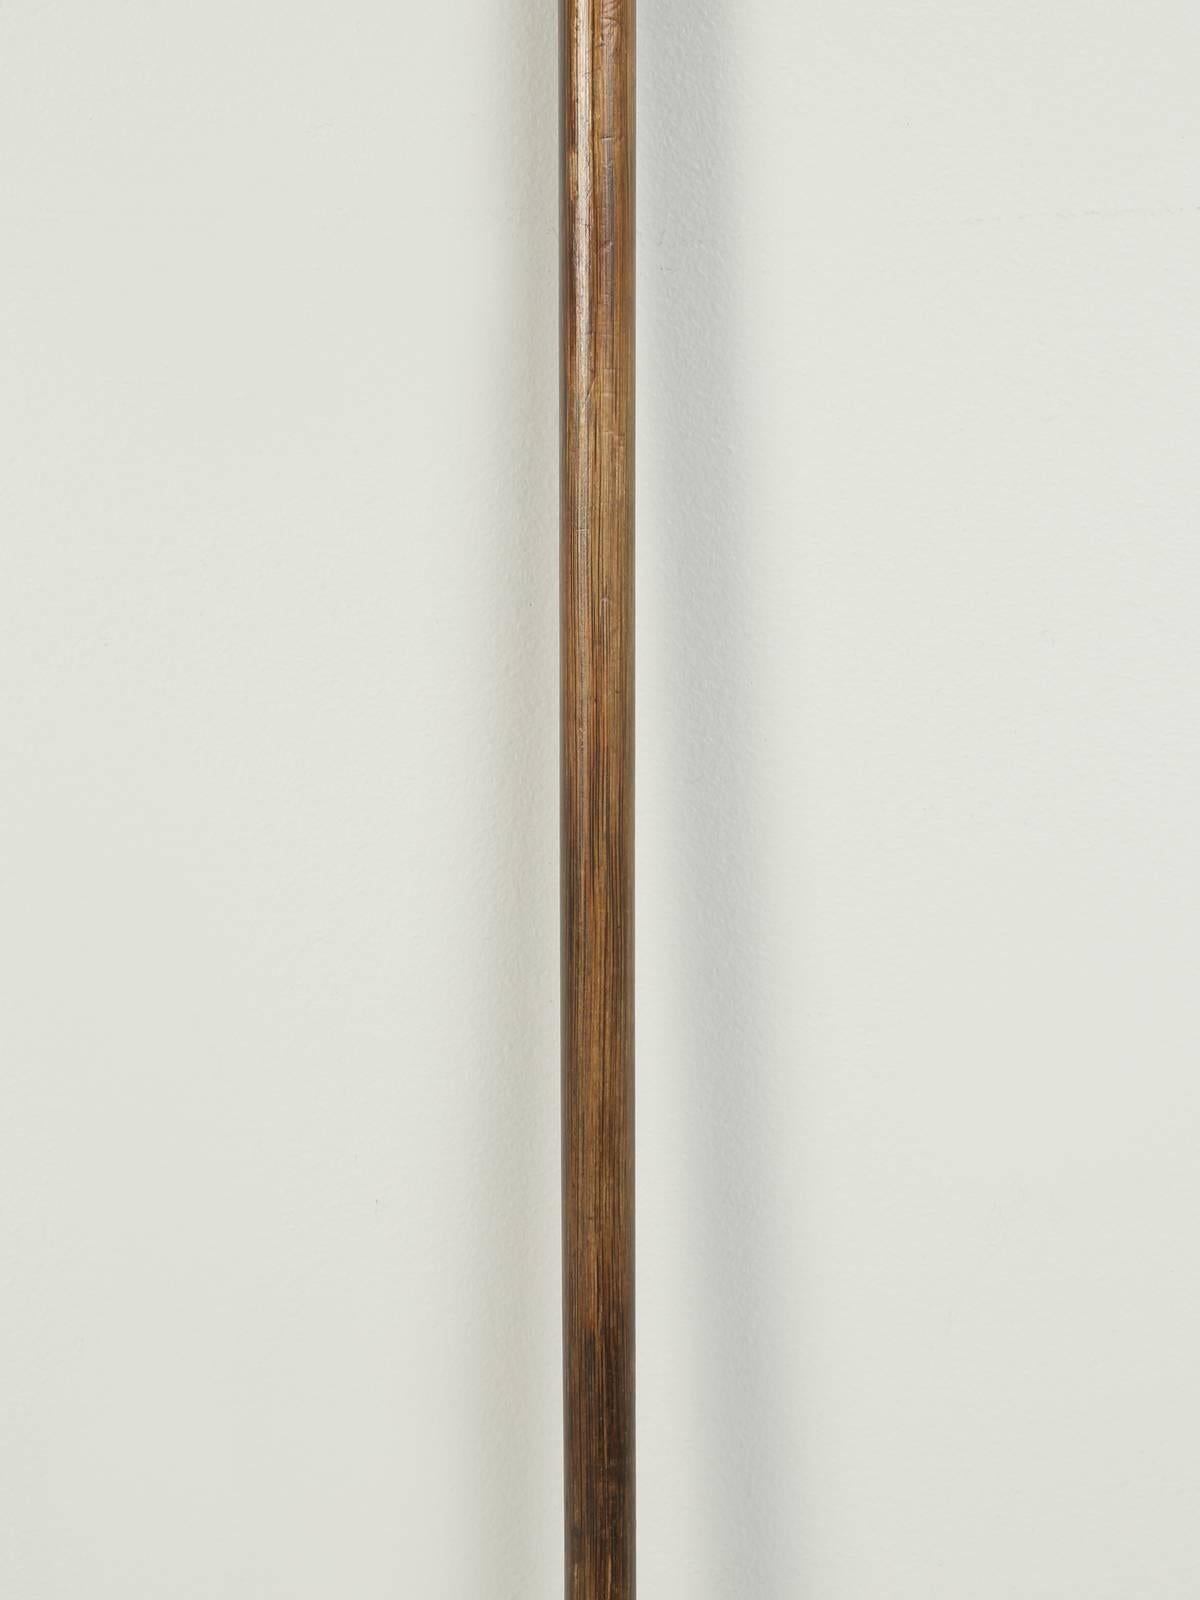 Early 20th Century Antique French Walking Stick for a Woman